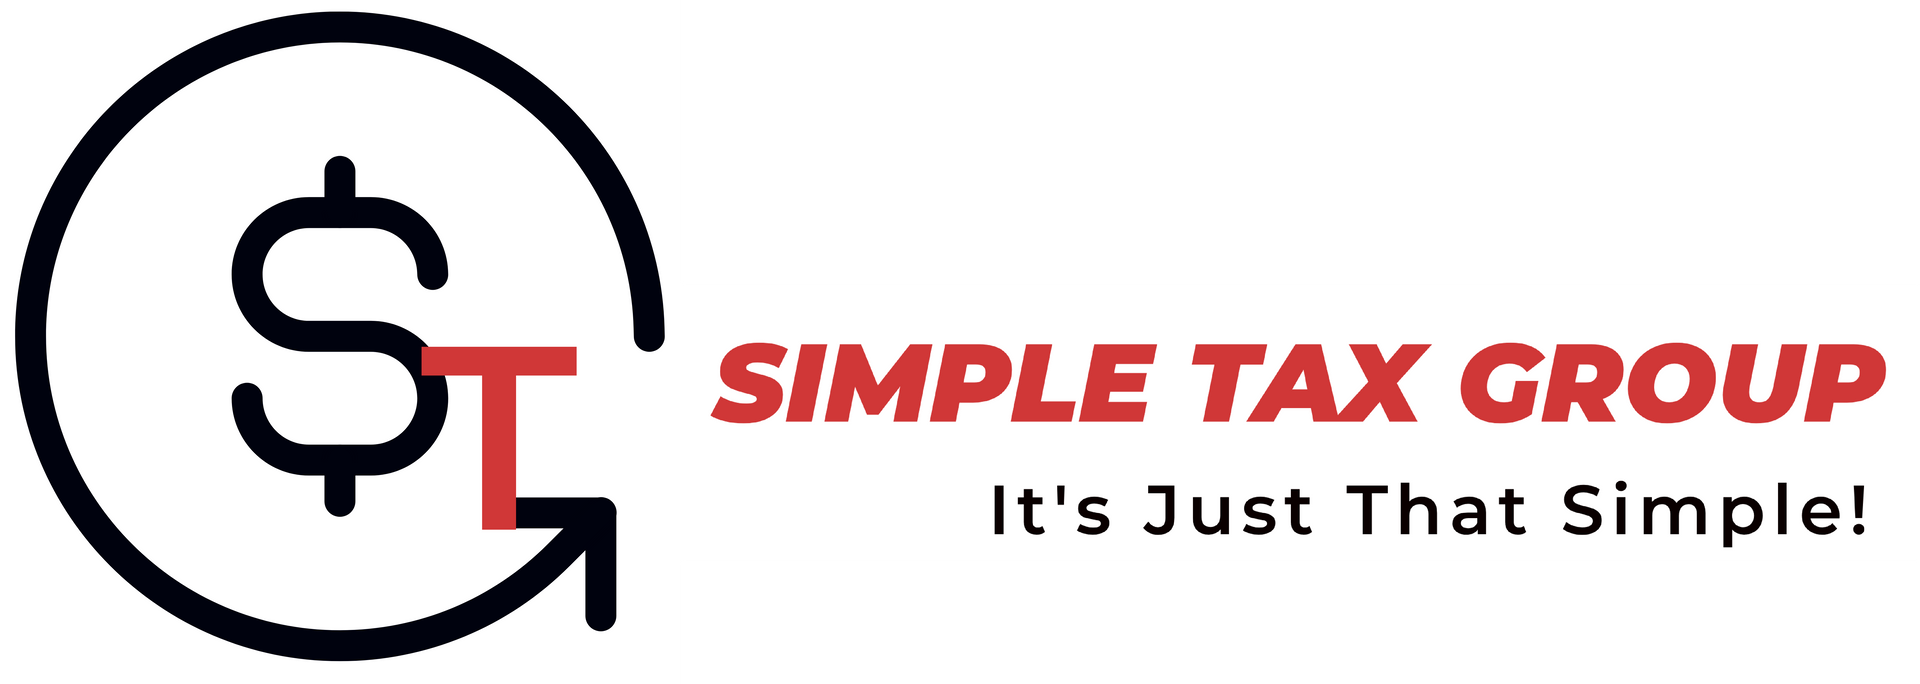 a red and black logo for toro taxes